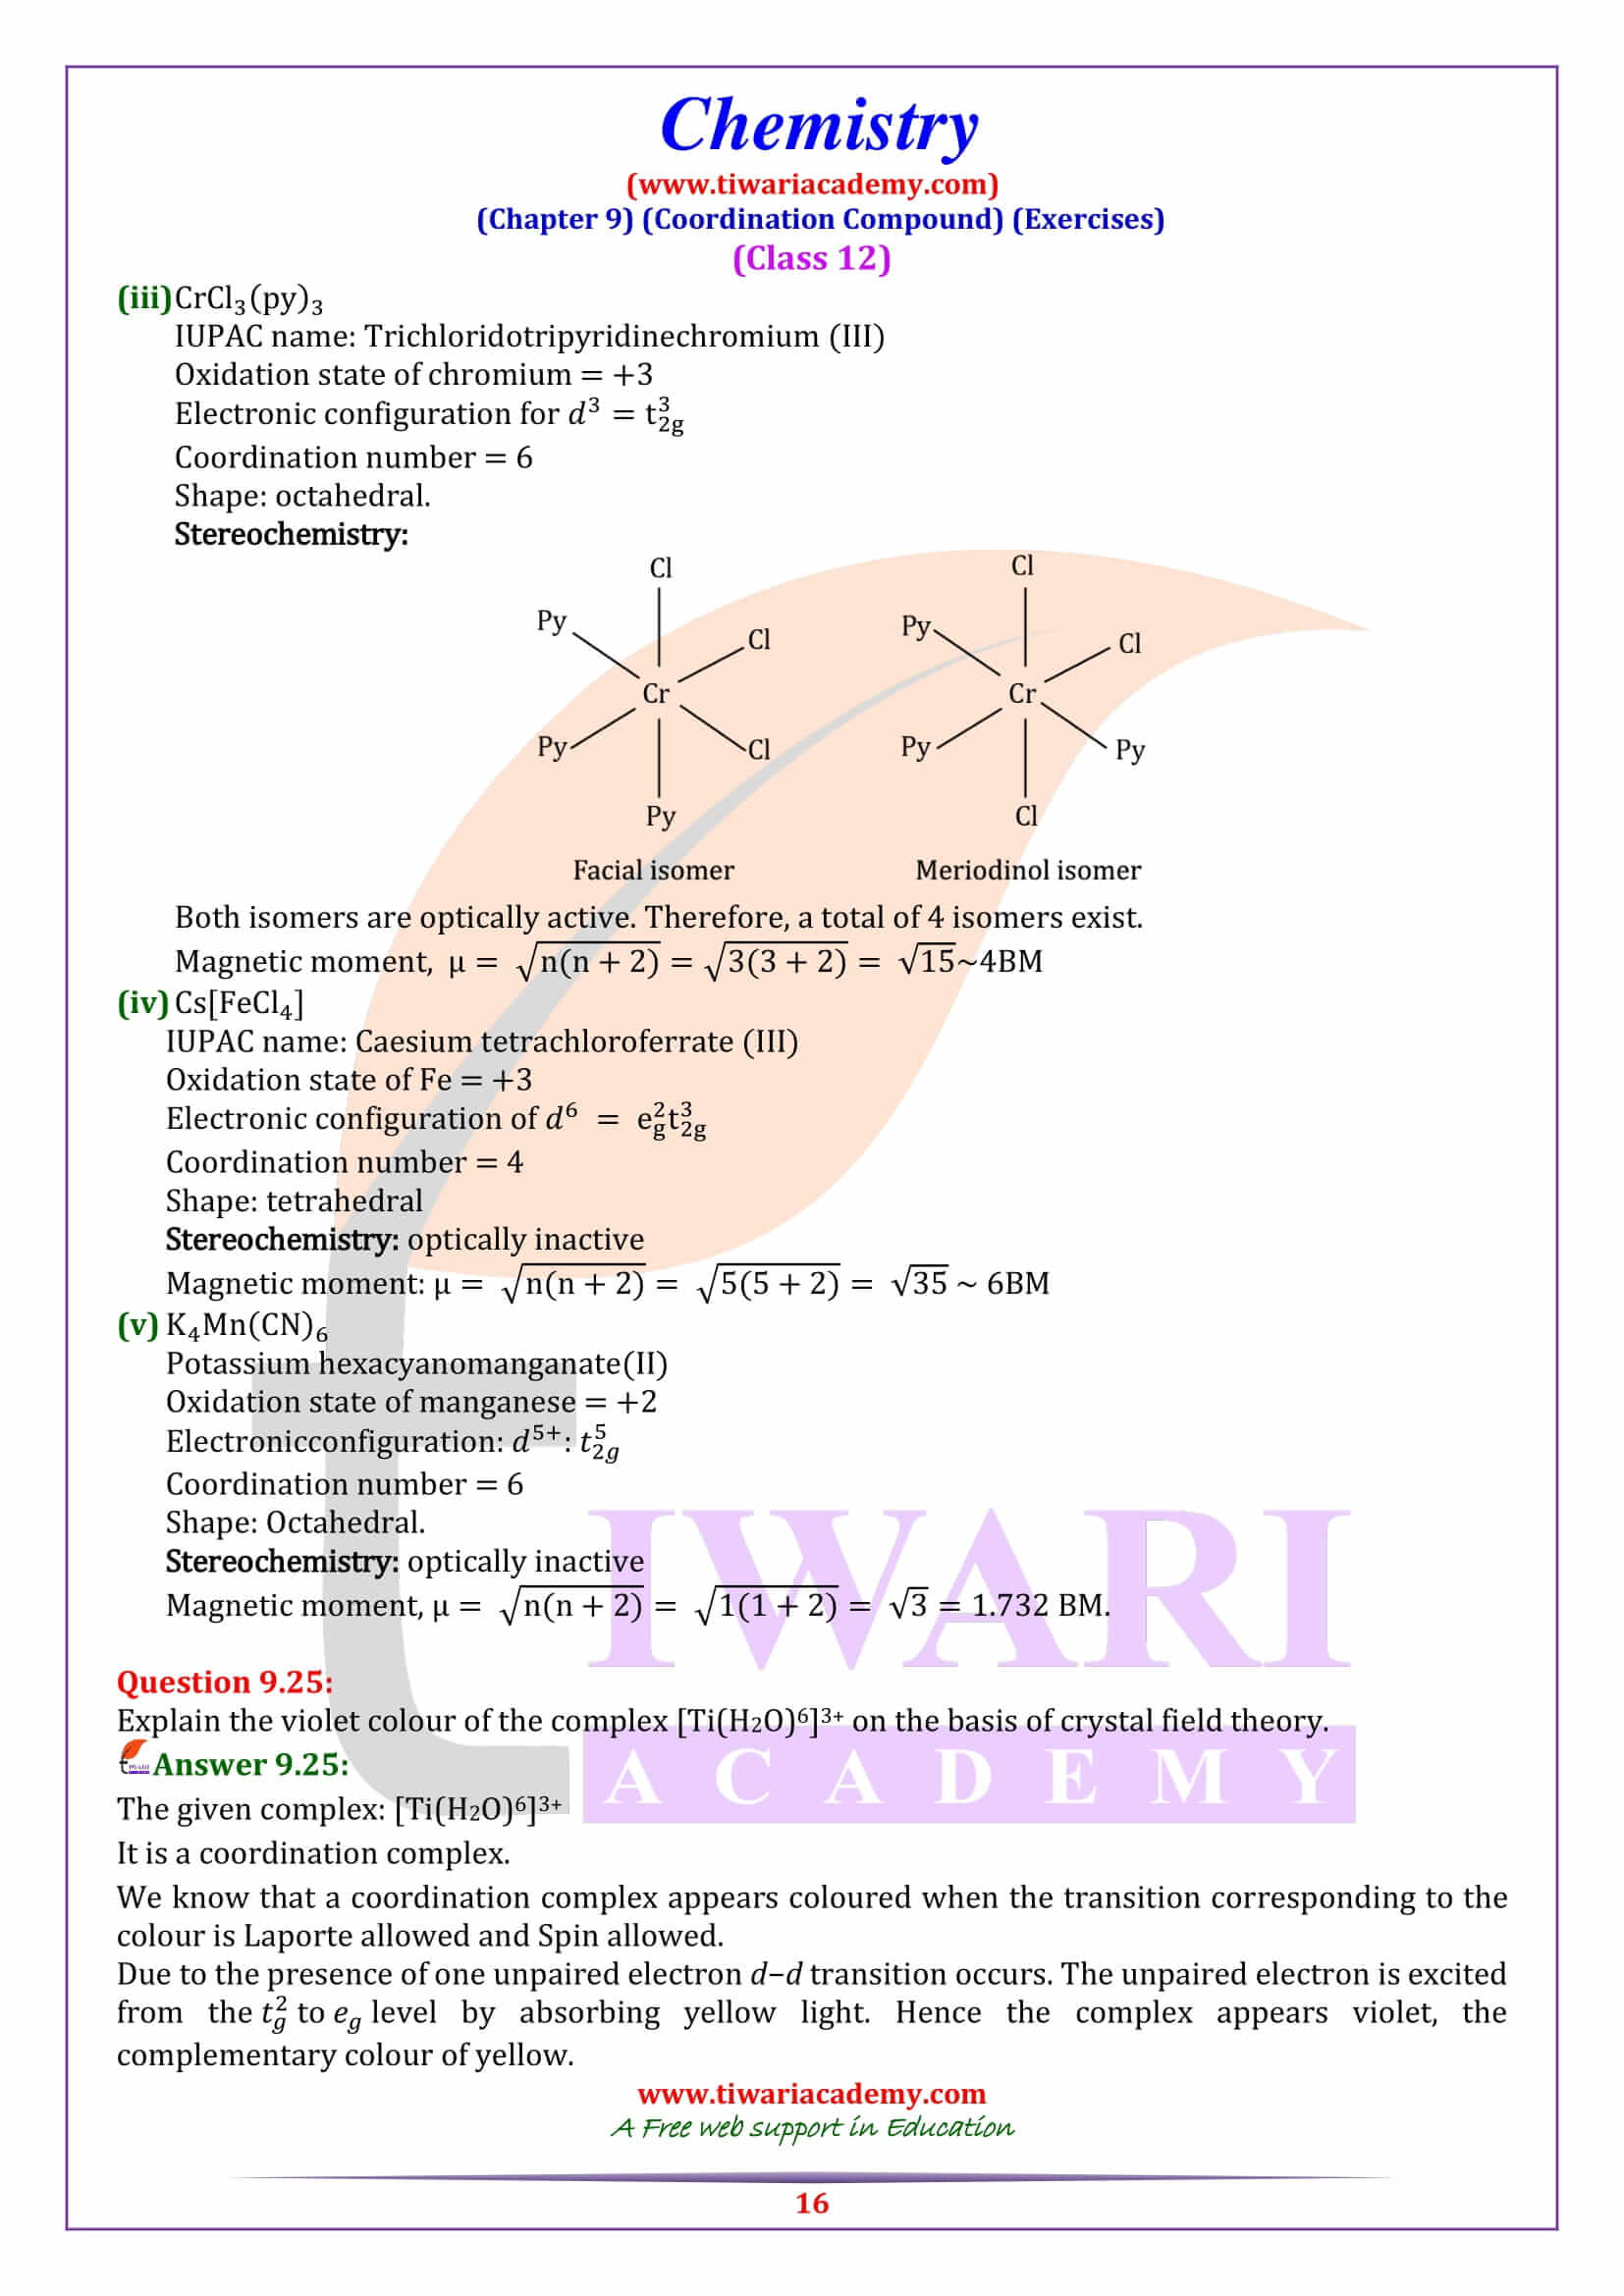 NCERT Solutions for Class 12 Chemistry Chapter 9 download